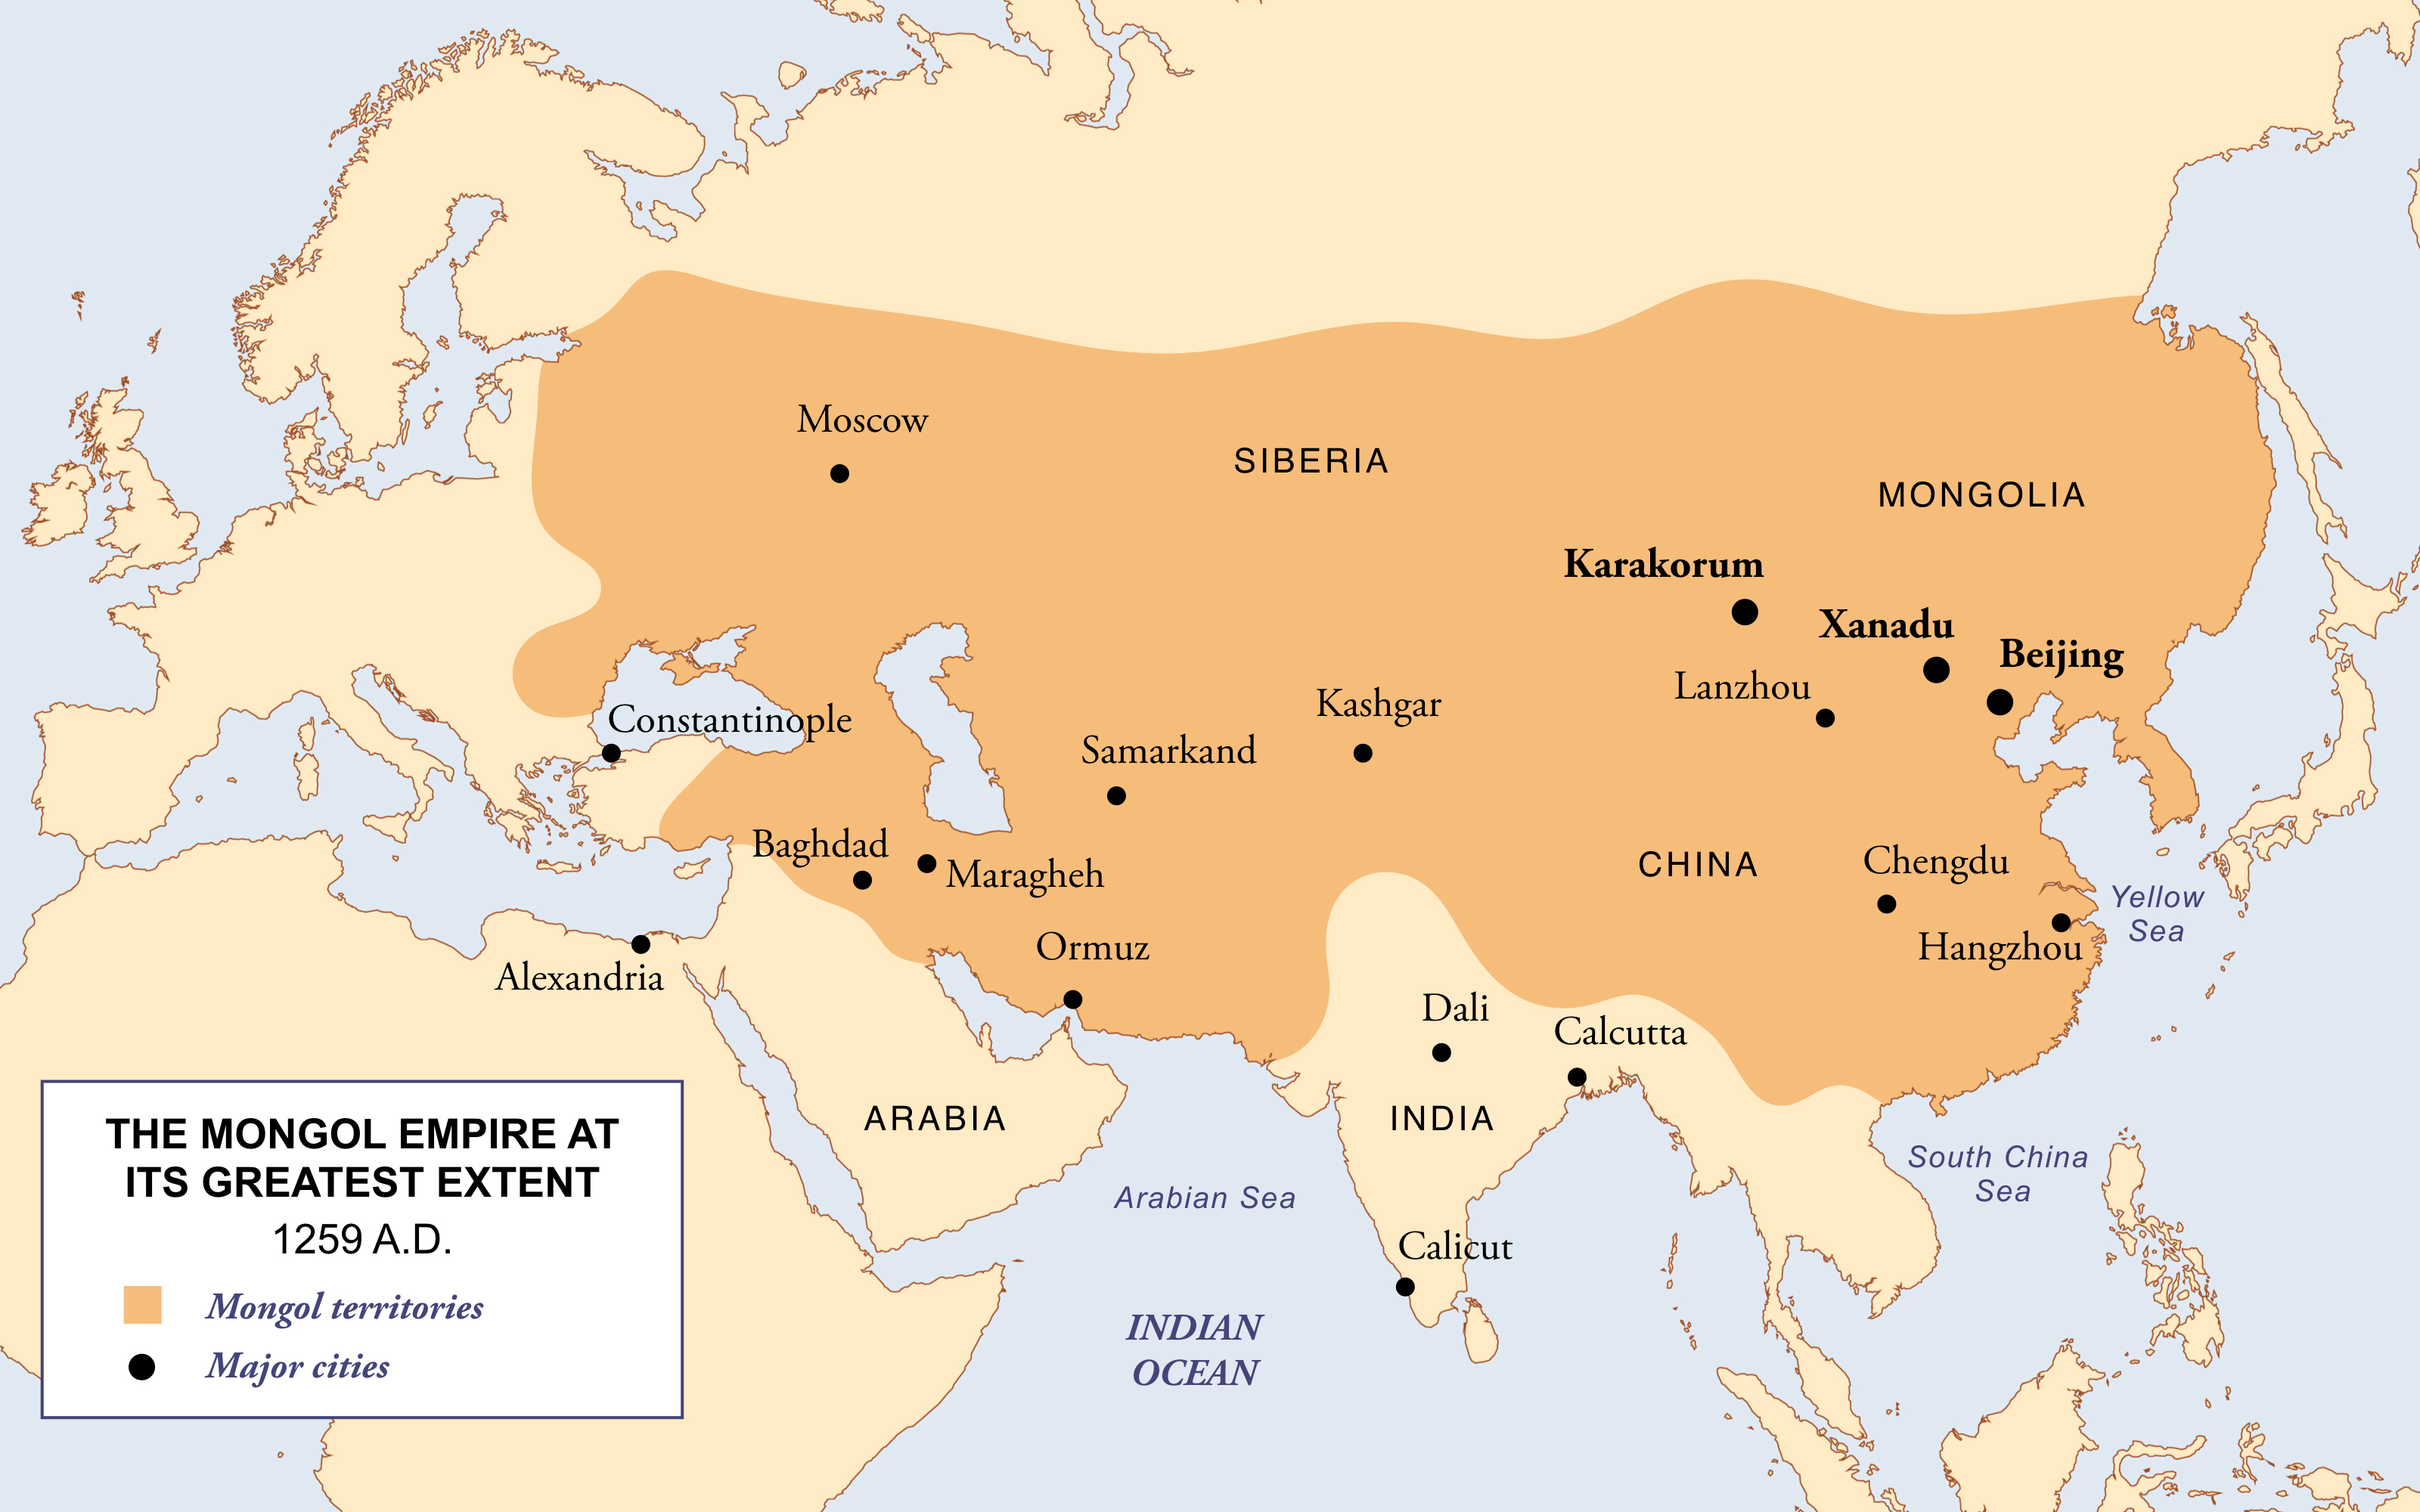 A painting of the Mongol Empire expanding into Northern China and Persia